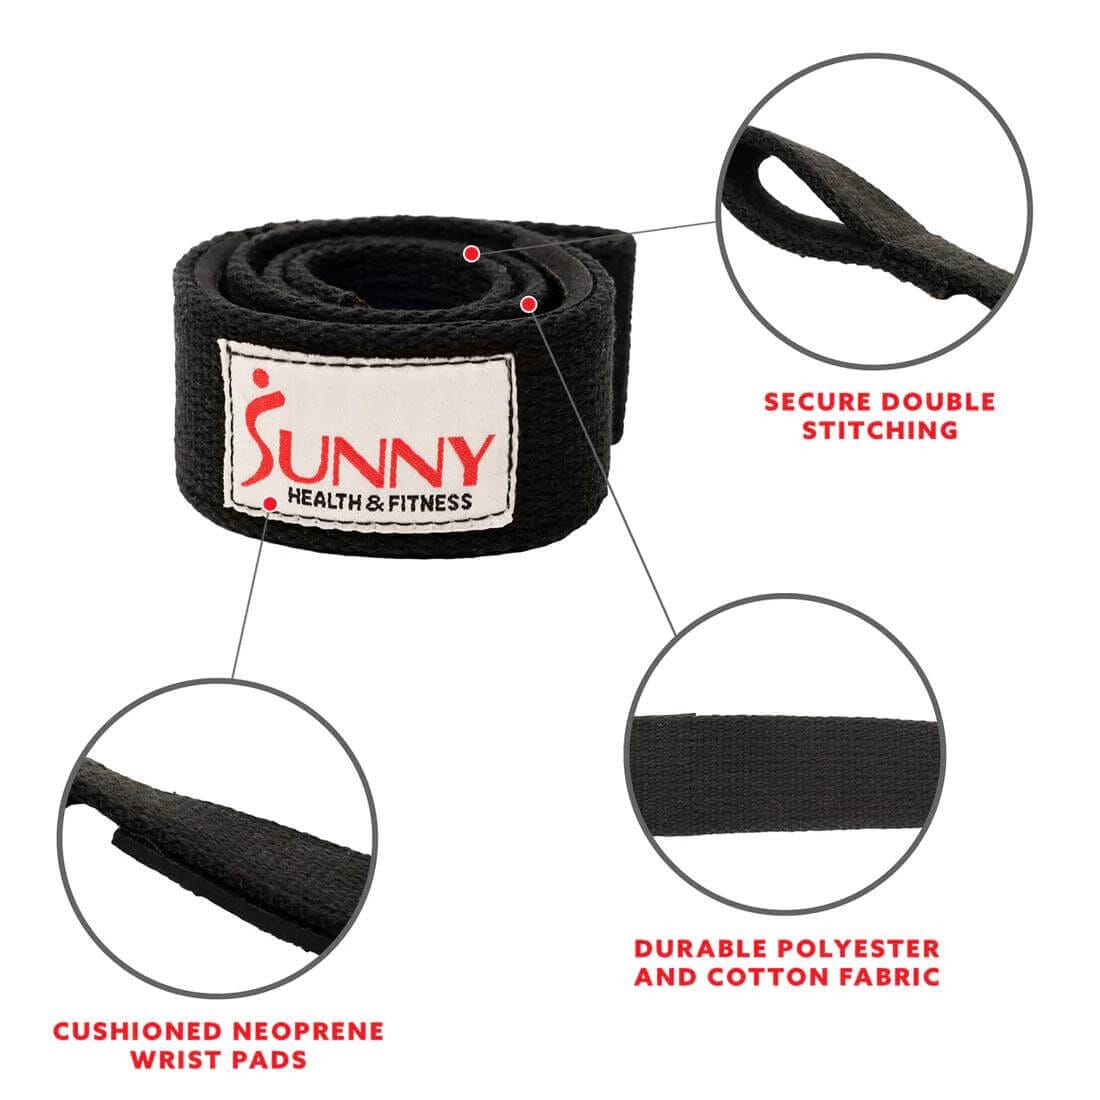 Sunny Health Fitness Heavy Lifting Straps - Sturdy Wrist Wraps - Strong Exercise Supports - Black